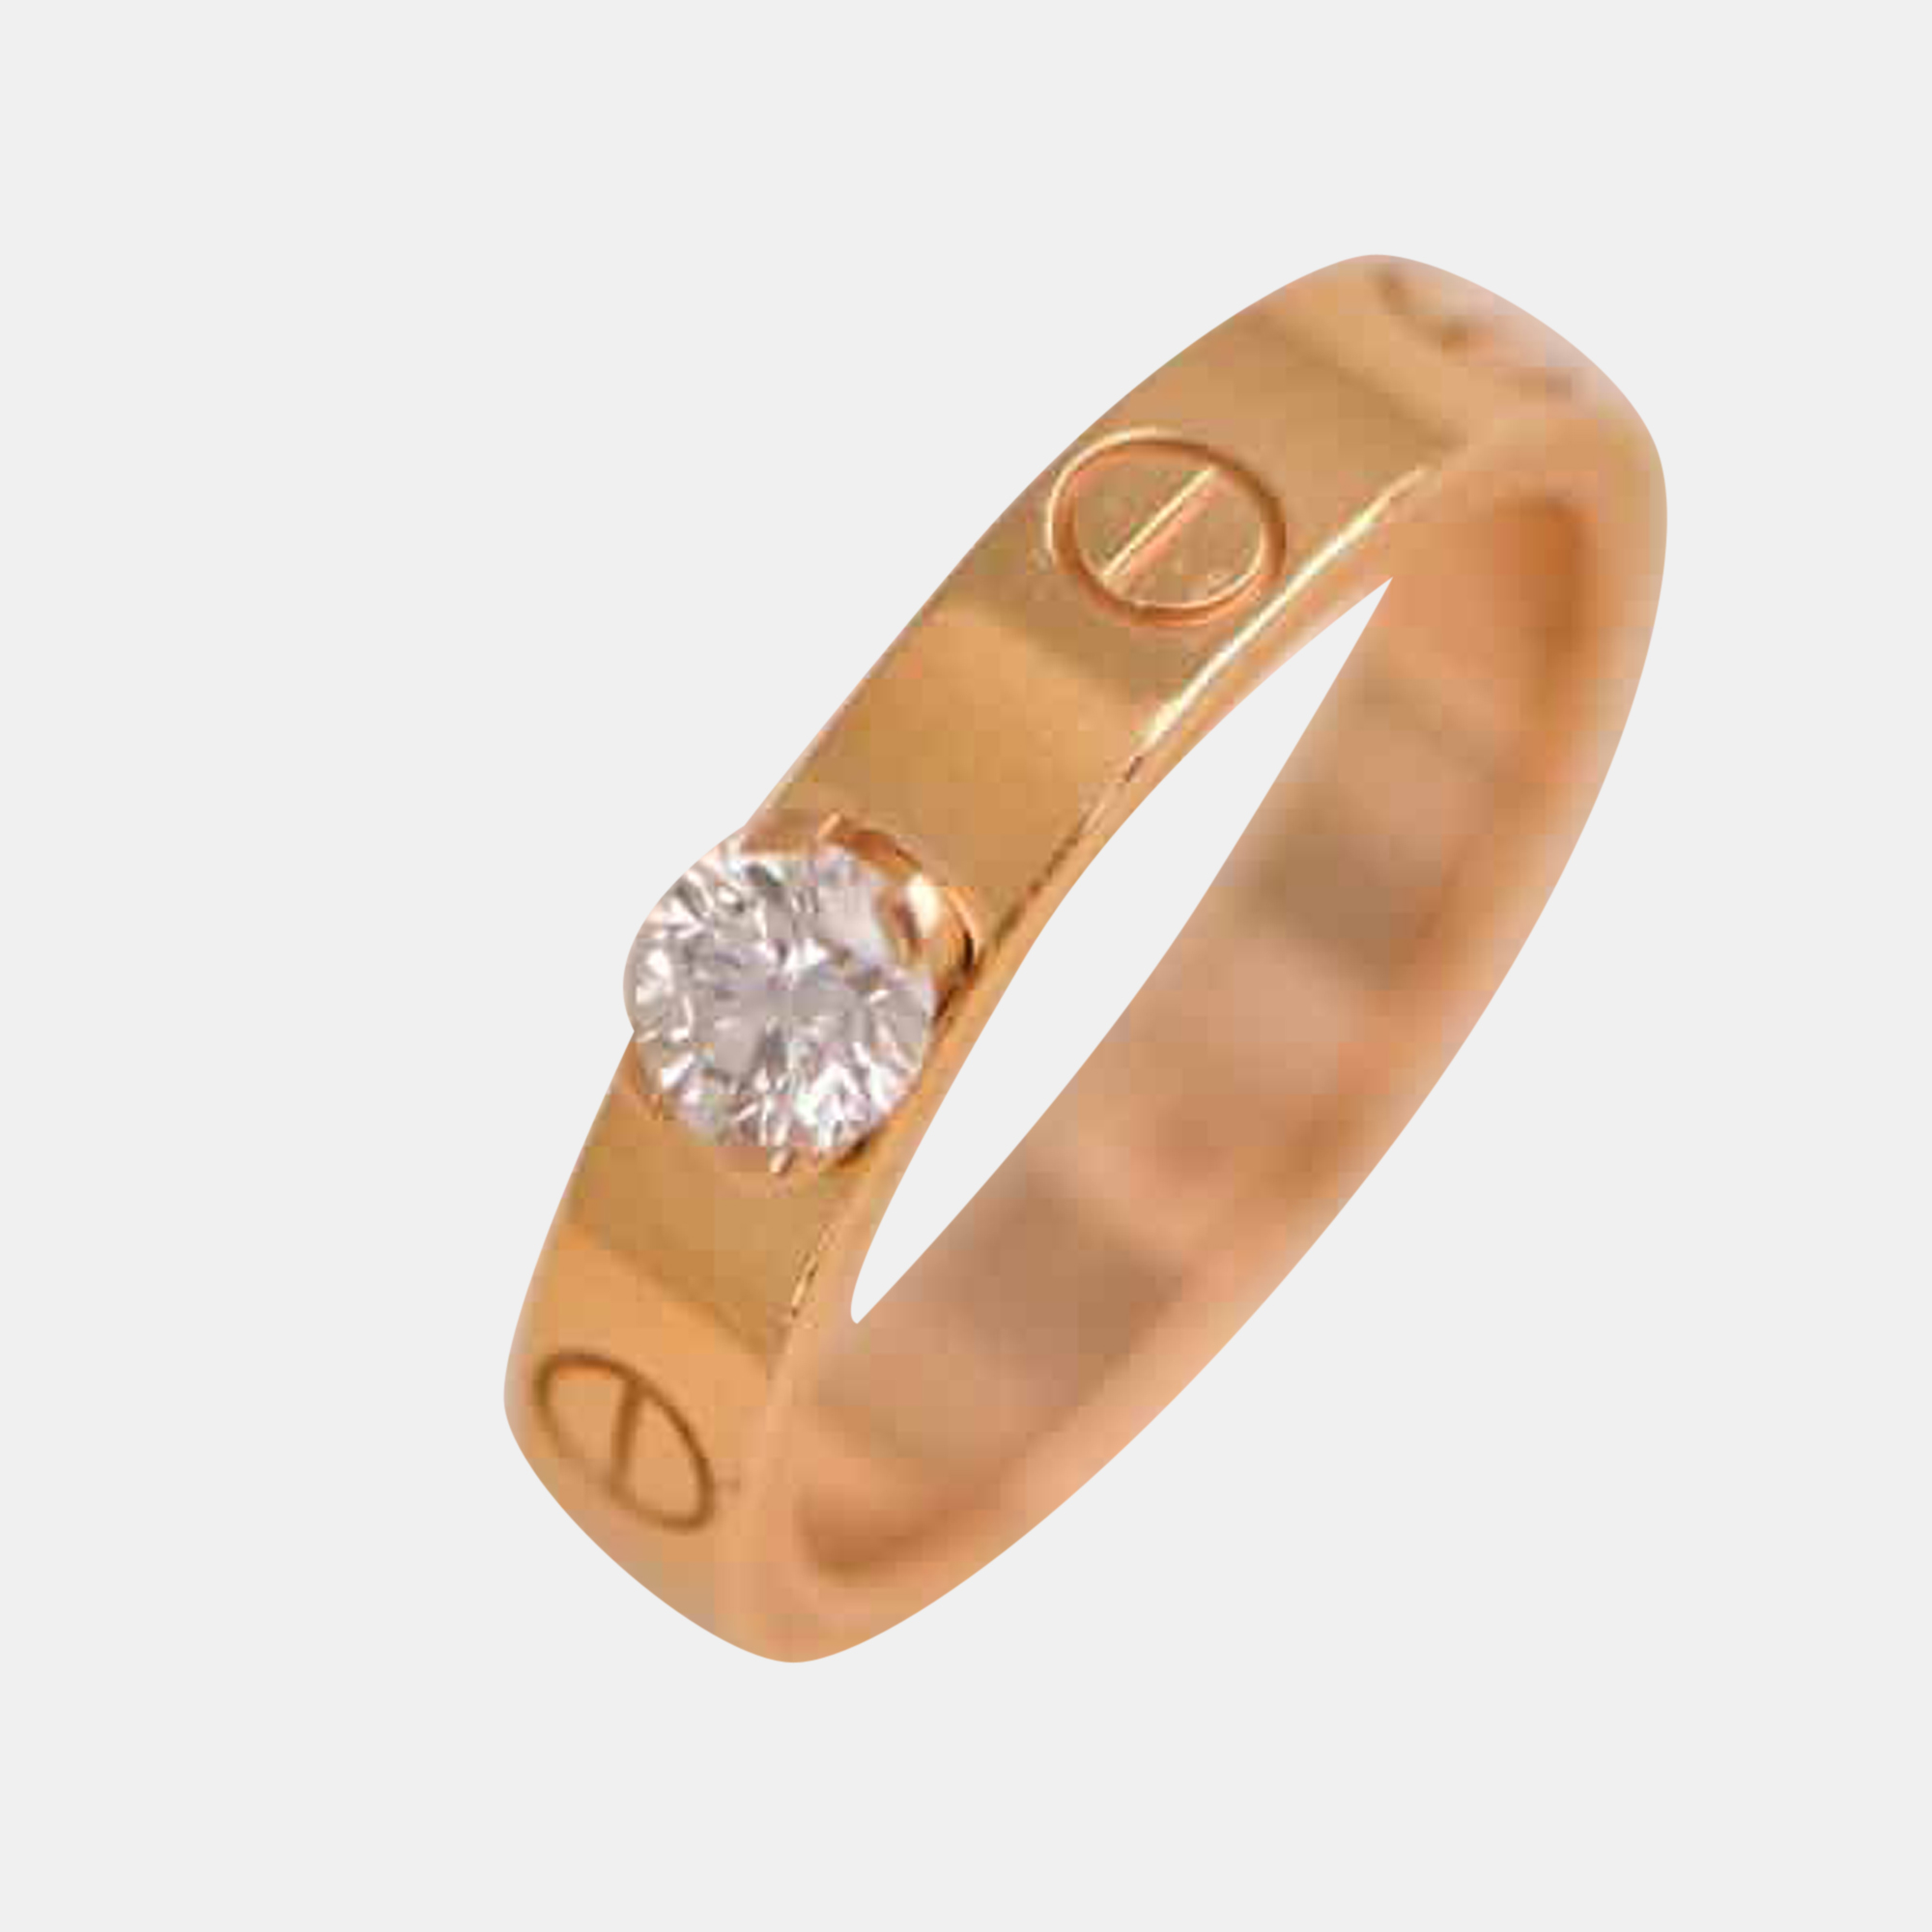 Cartier LOVE Solitaire Rose Gold Diamond Ring Size 52